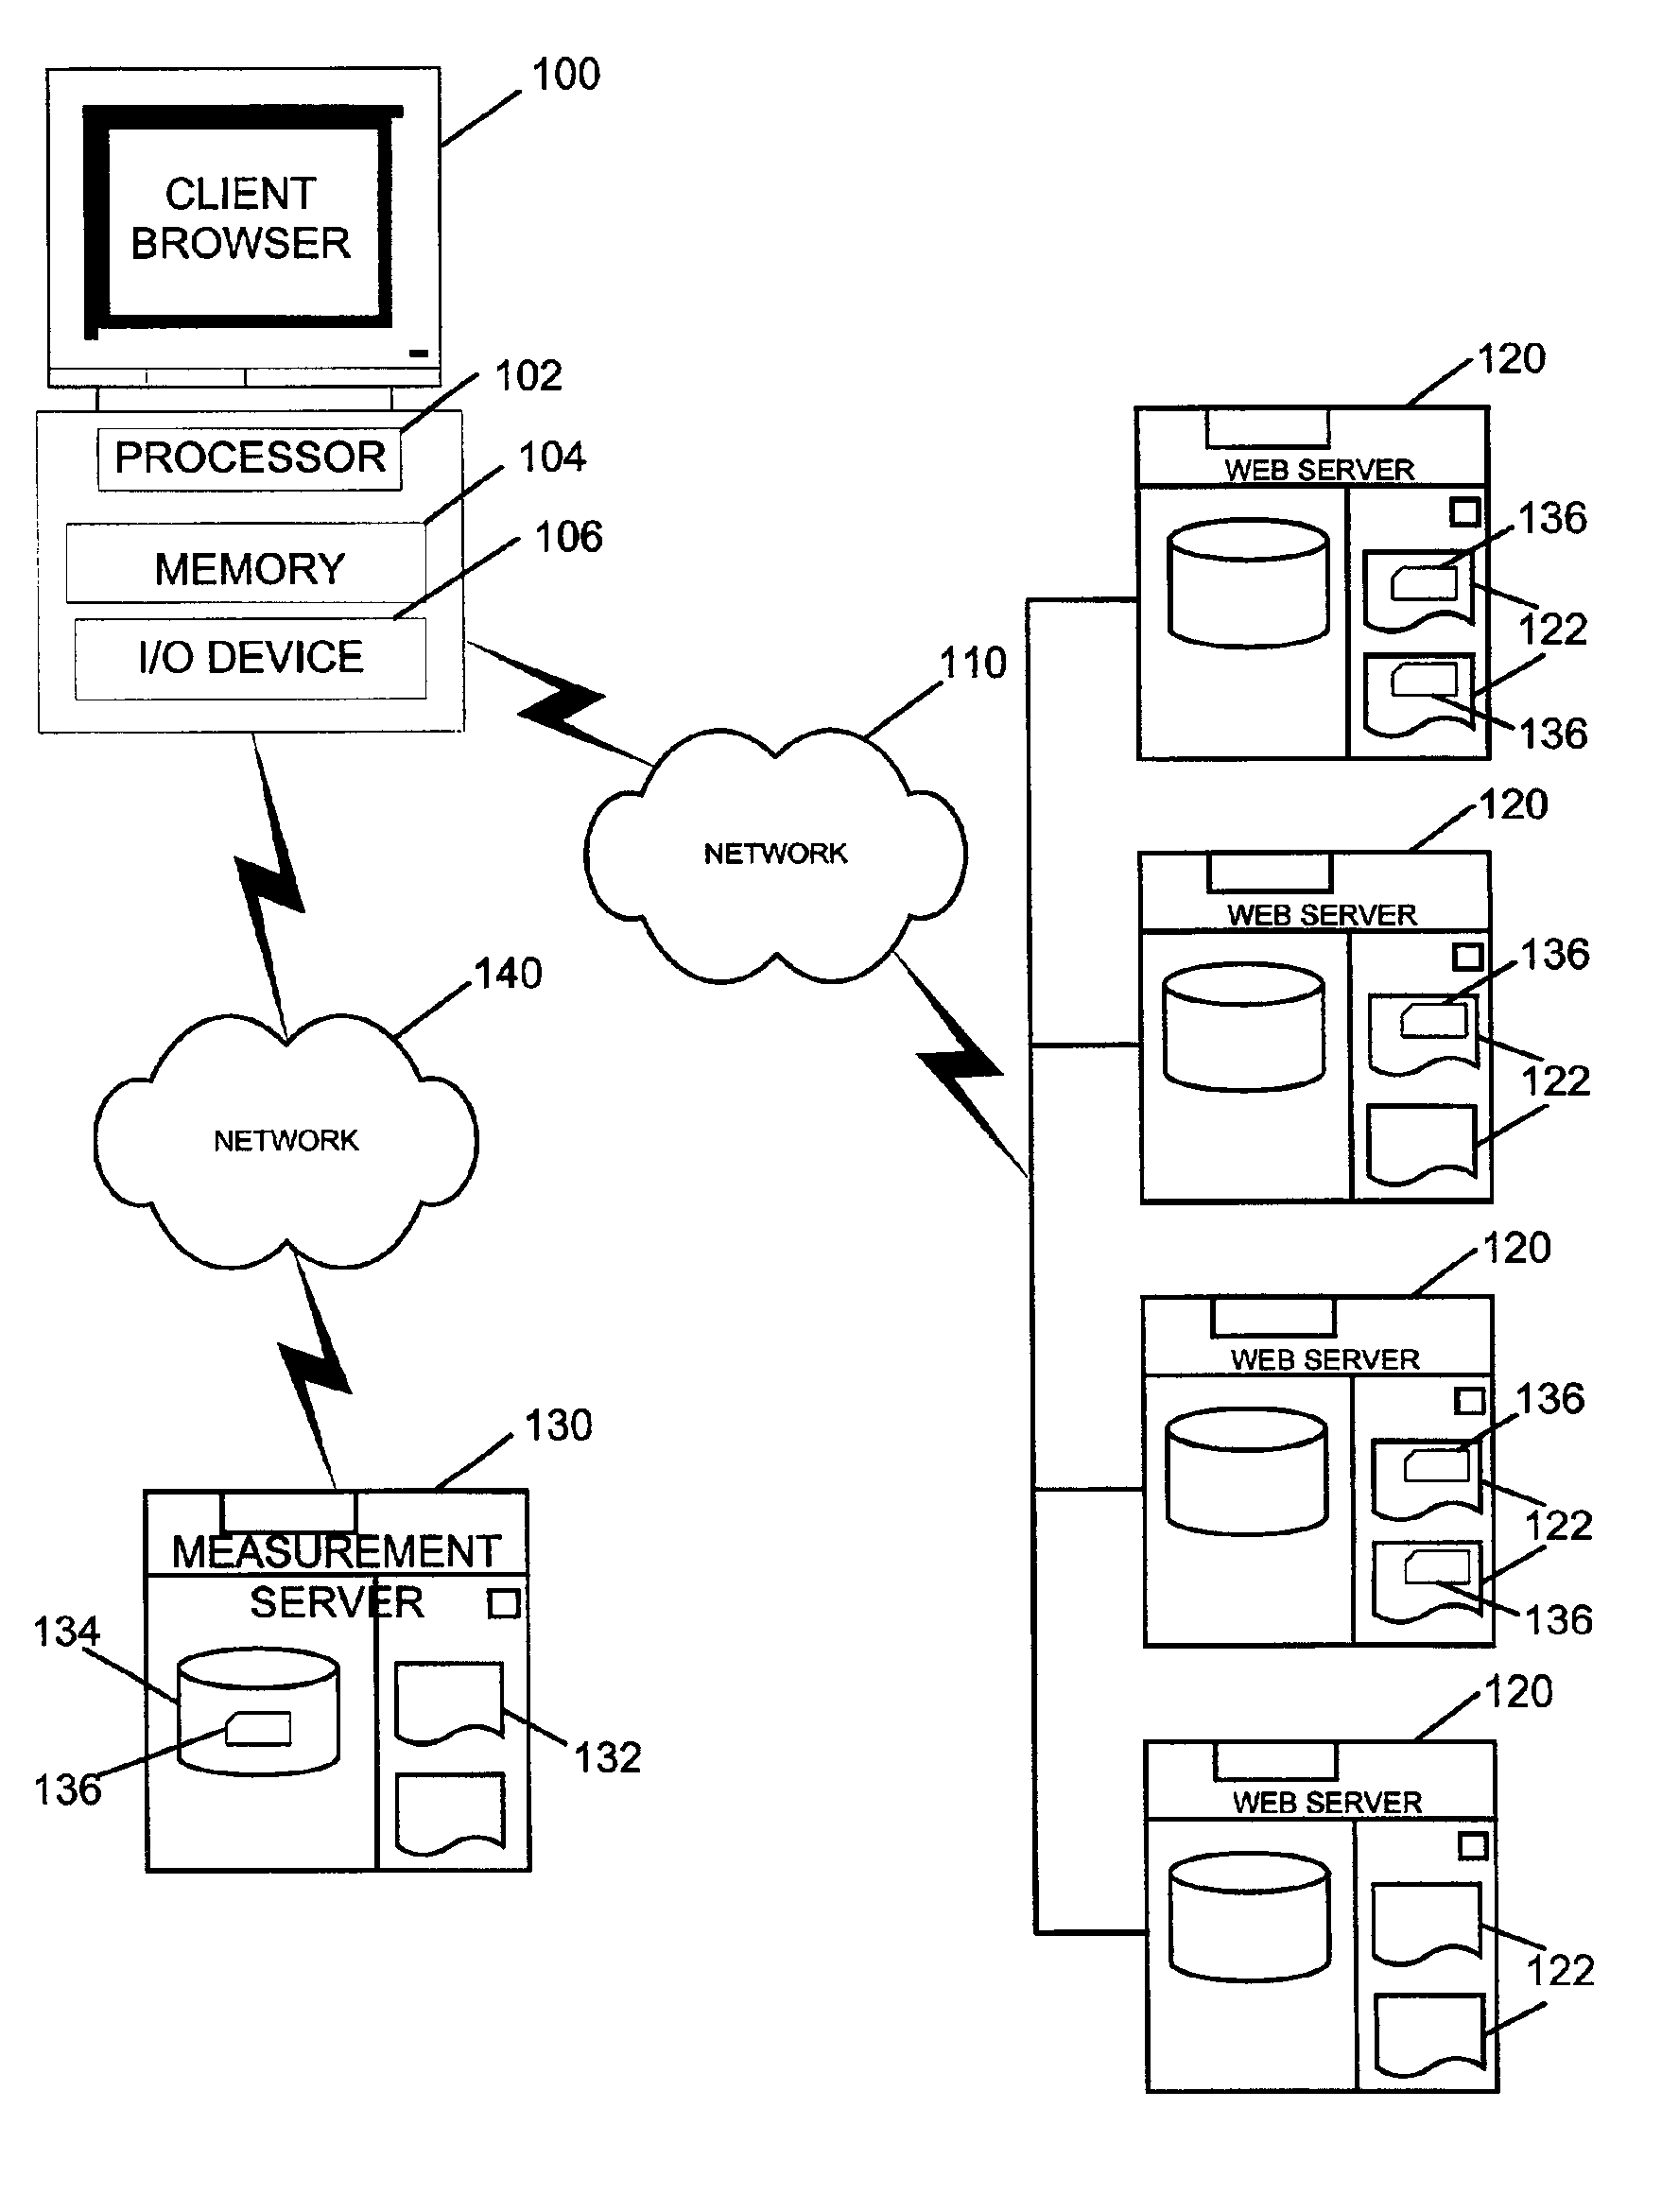 System and method for monitoring browser event activities